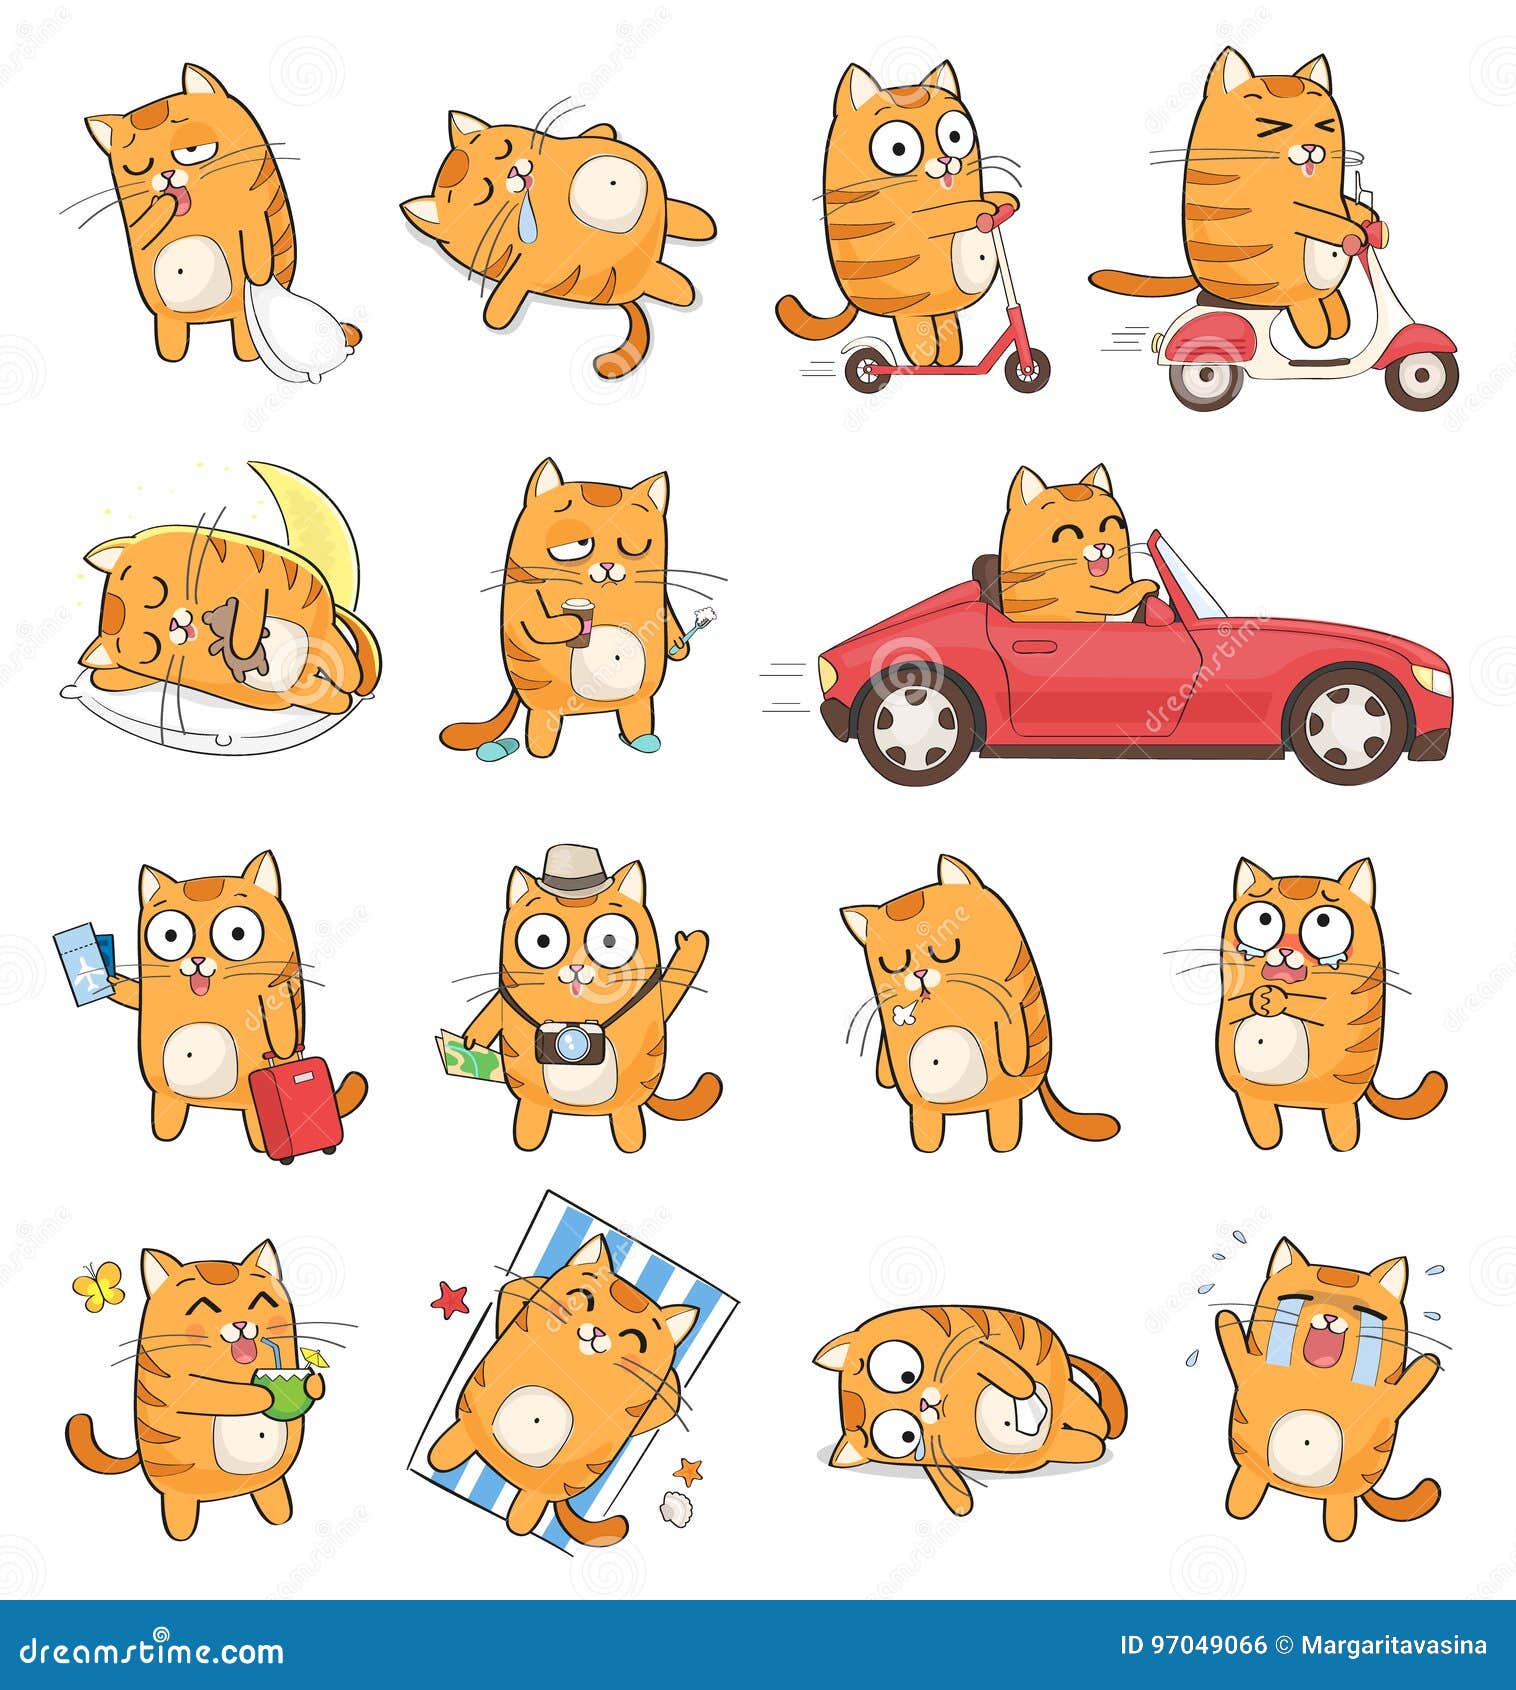 cute cat character with different emotions.